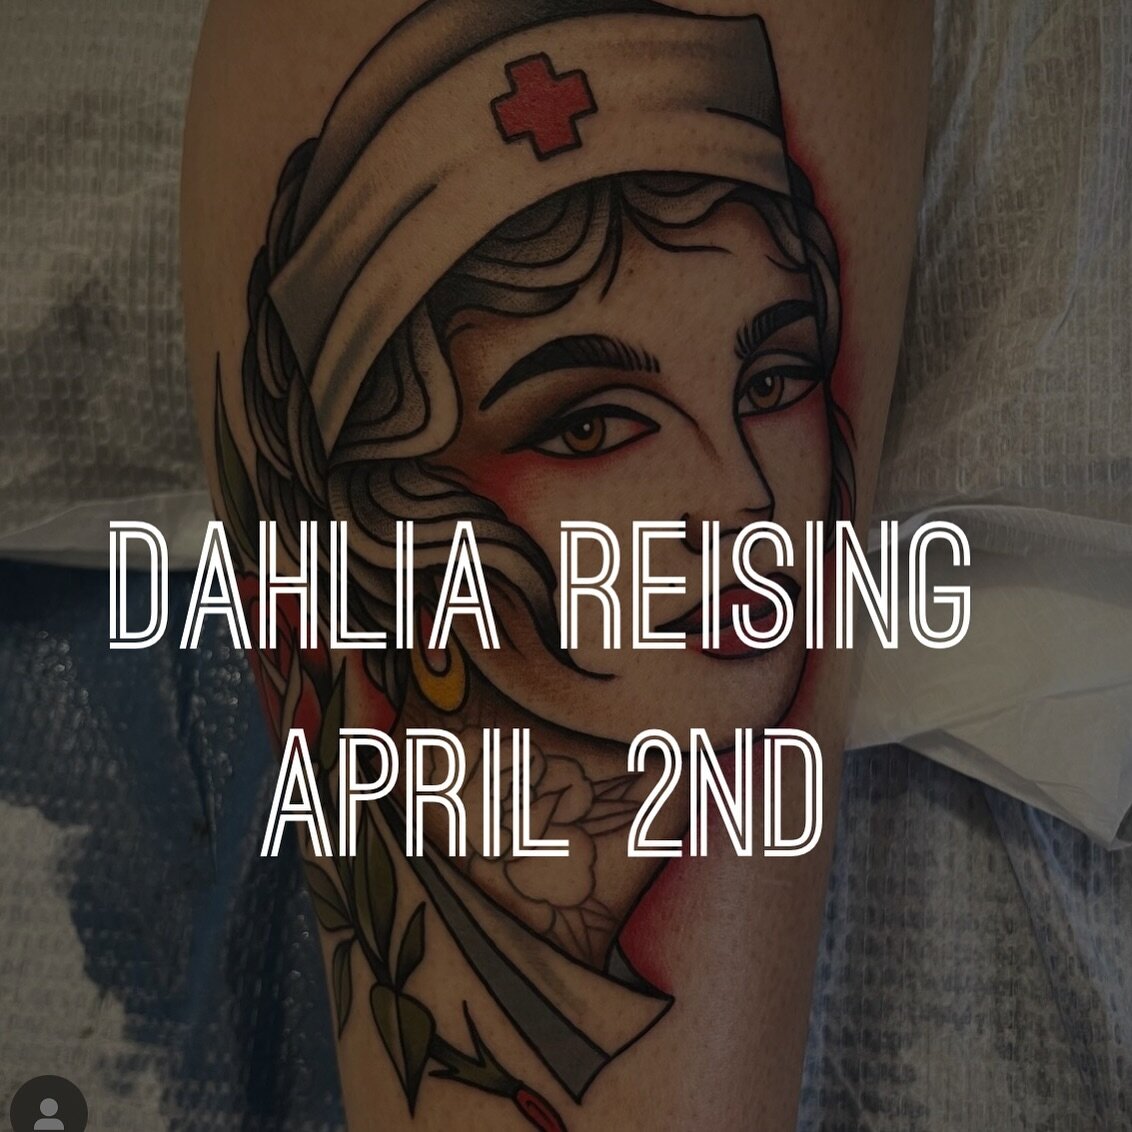 The lovely and talented @dahliareisingtattoo will be with us for ONE DAY ONLY! Interested in booking with her? Please reach out to her directly! @dahliareisingtattoo @dahliareisingtattoo @dahliareisingtattoo